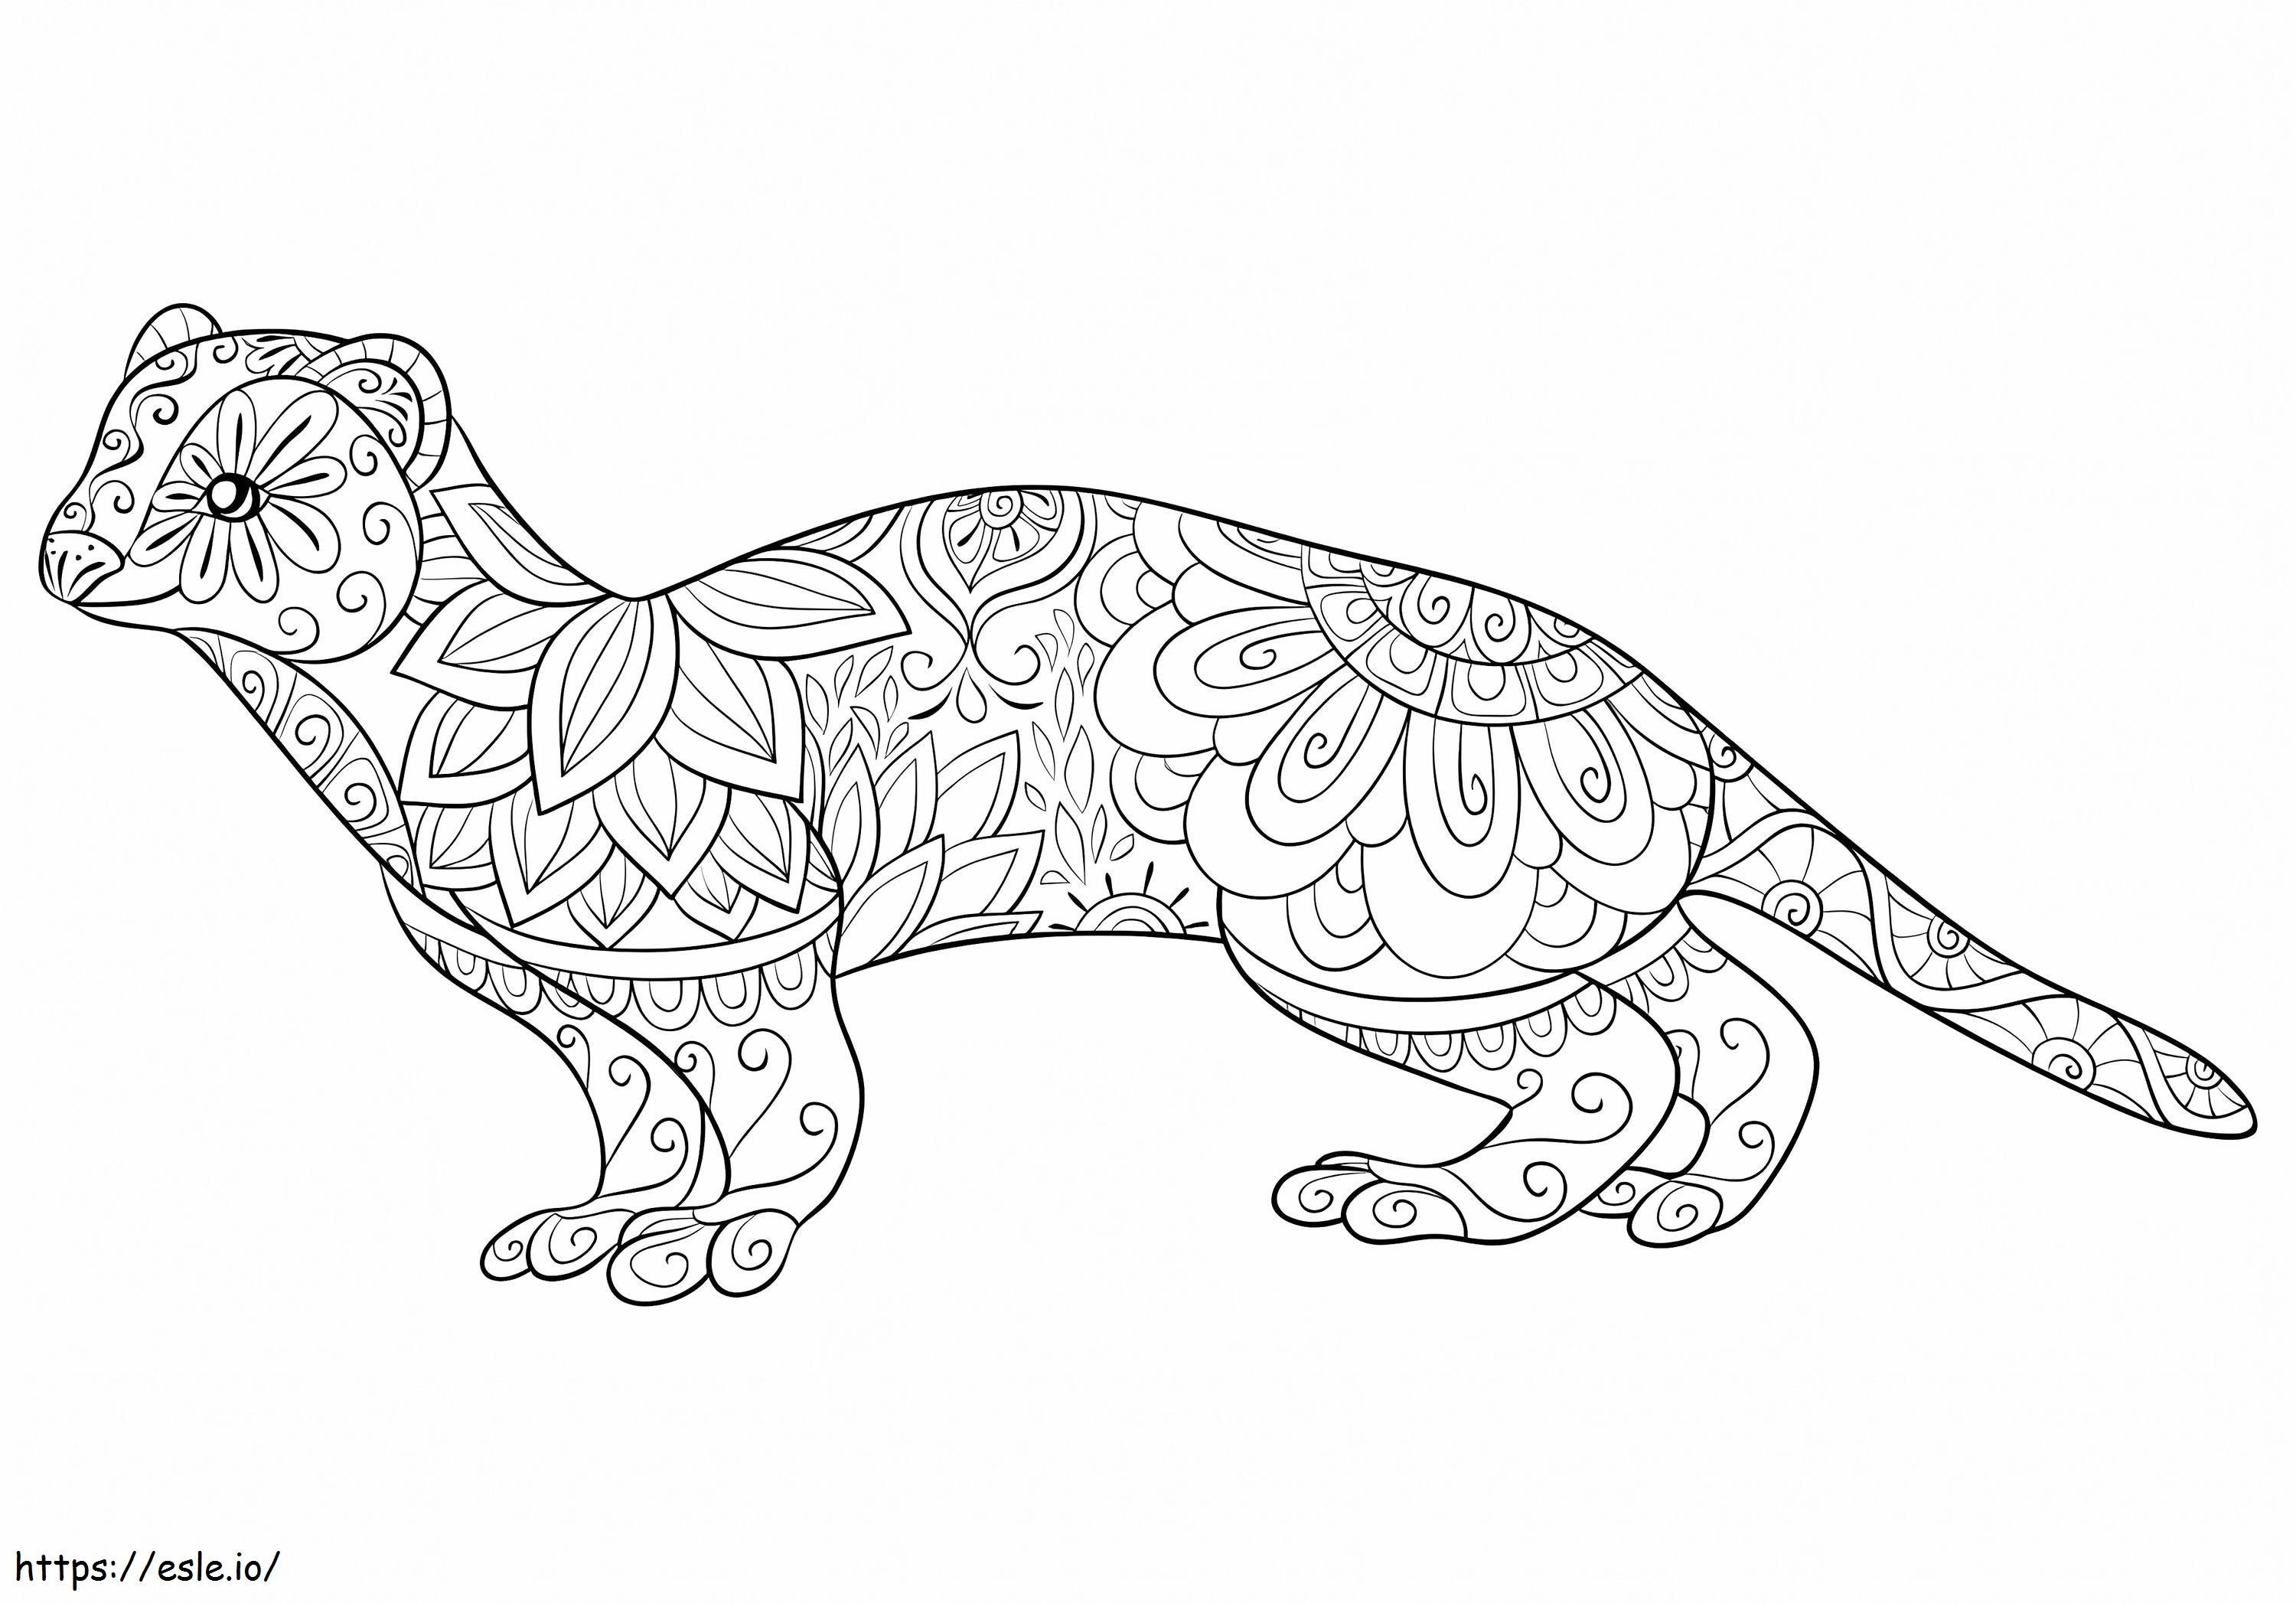 The Otter Is For Adults coloring page